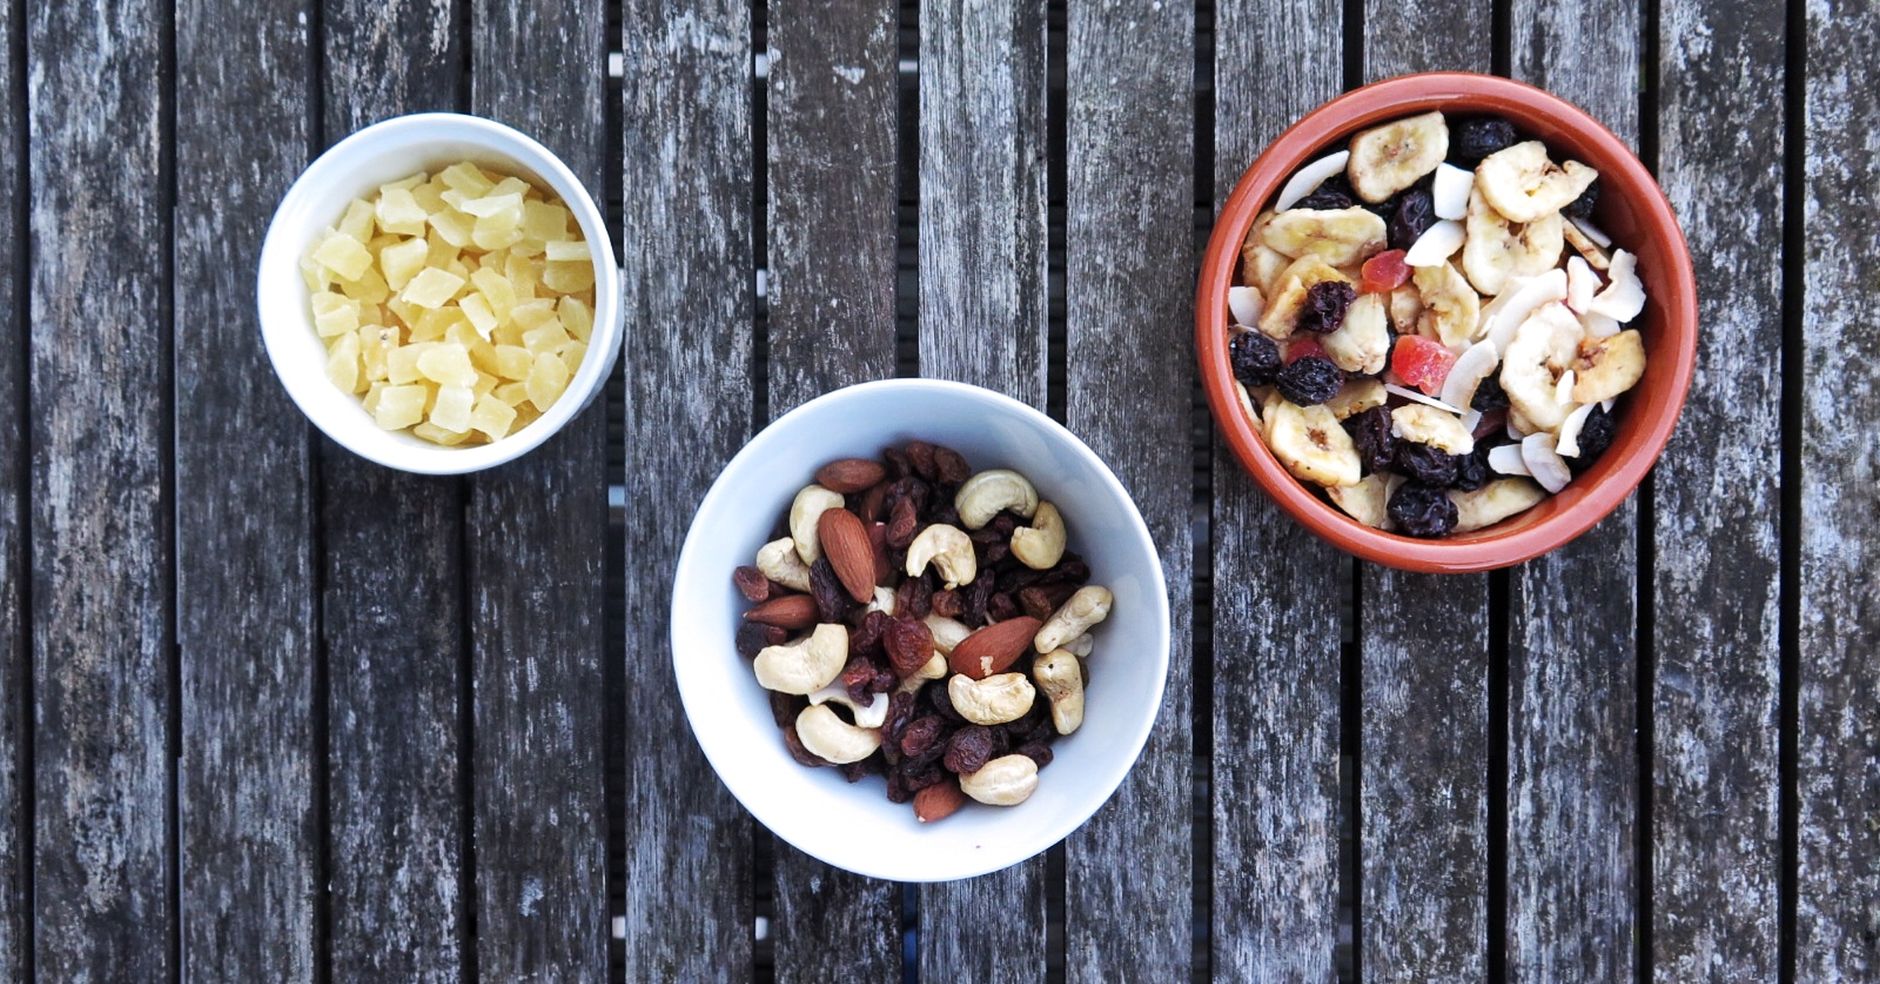 Fruit and nuts